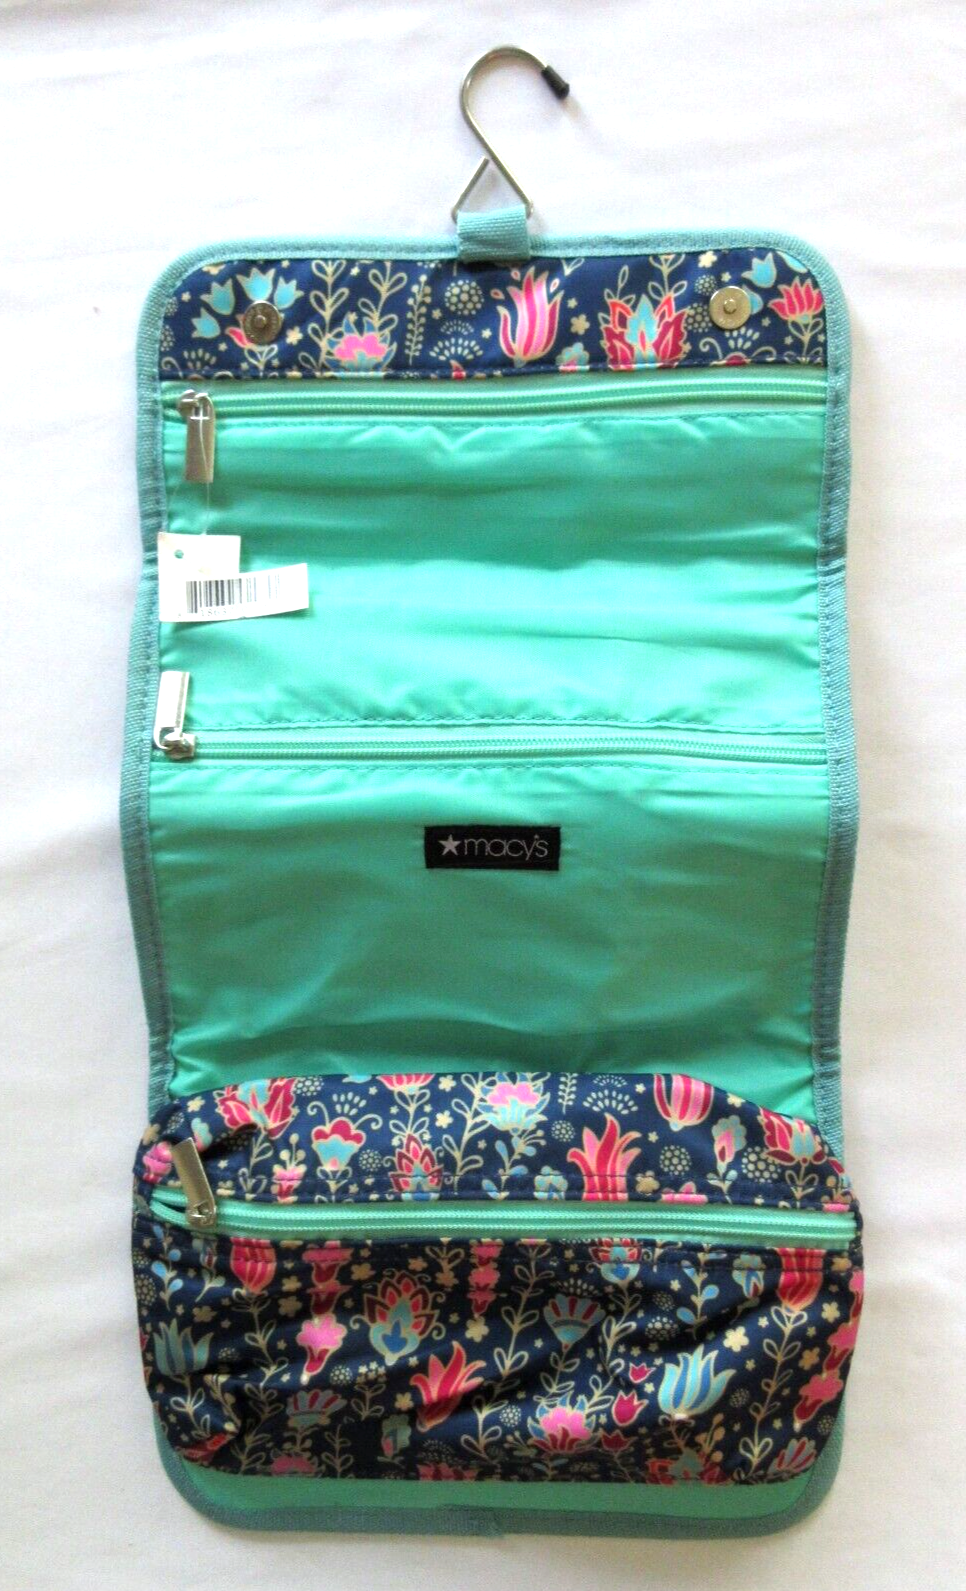 Primary image for Macy's Designer Toiletry Cosmetic Travel Bag Makeup Organizer Storage Brand New